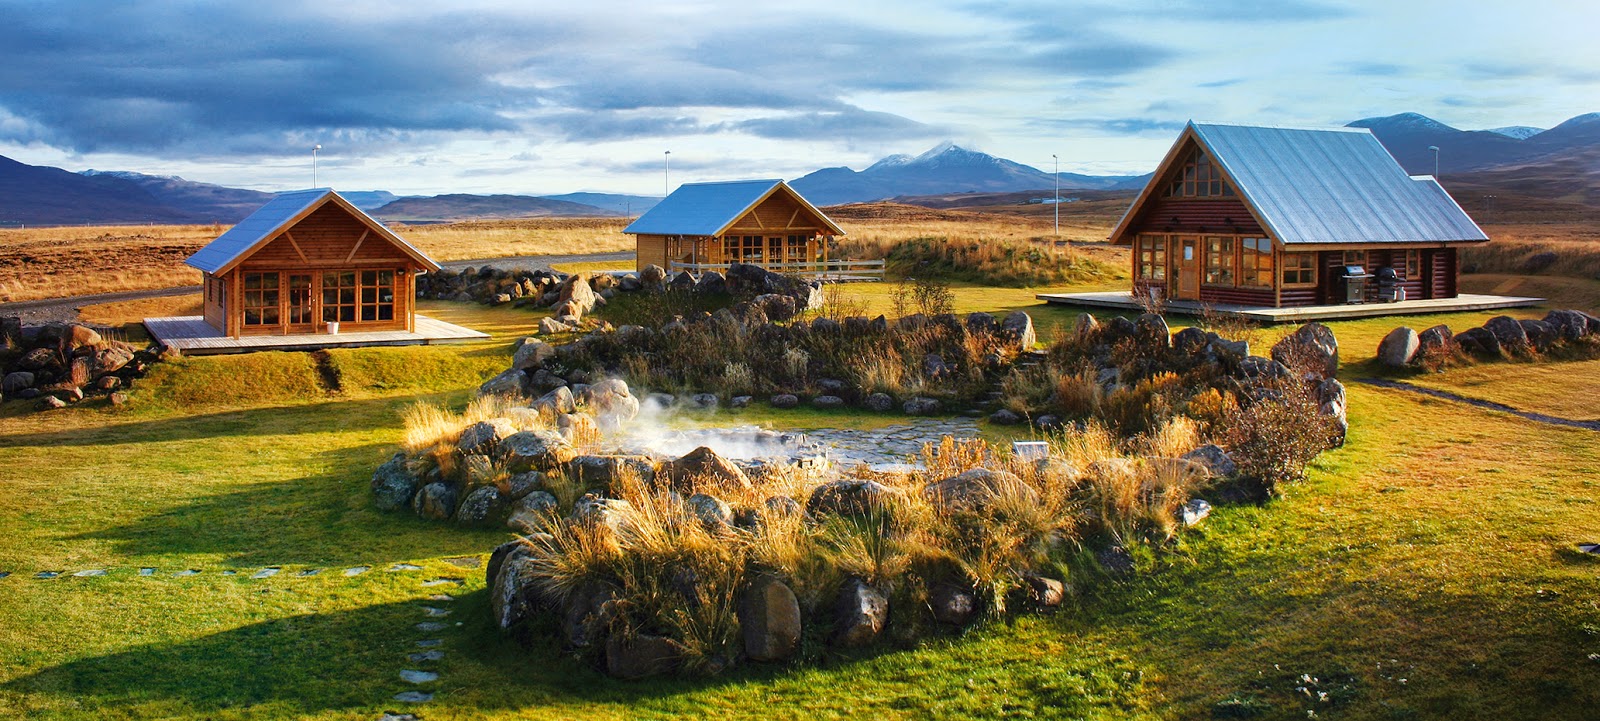 Where to Stay While on a Trip in Iceland | Iceland24